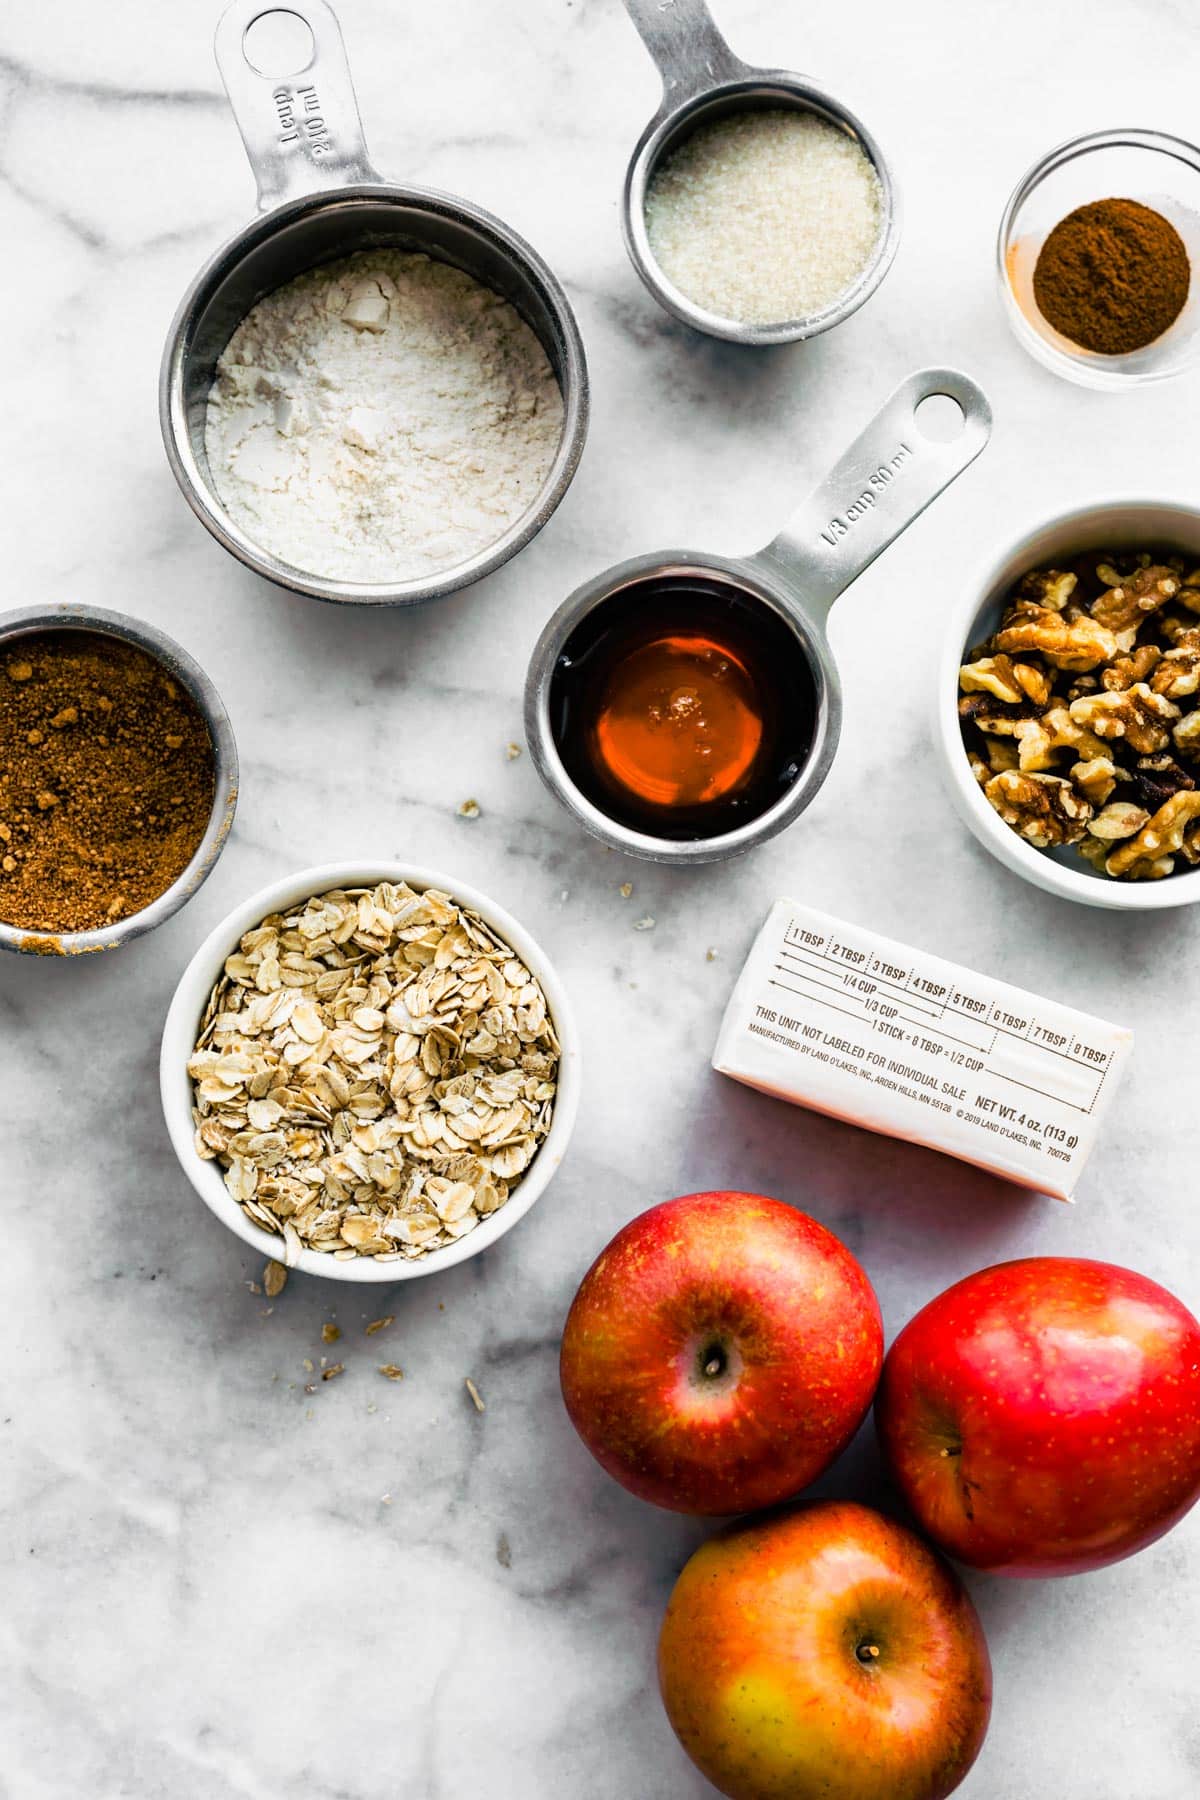 Red apples, oatmeal, maple syrup, butter and other ingredients on a white marble countertop.